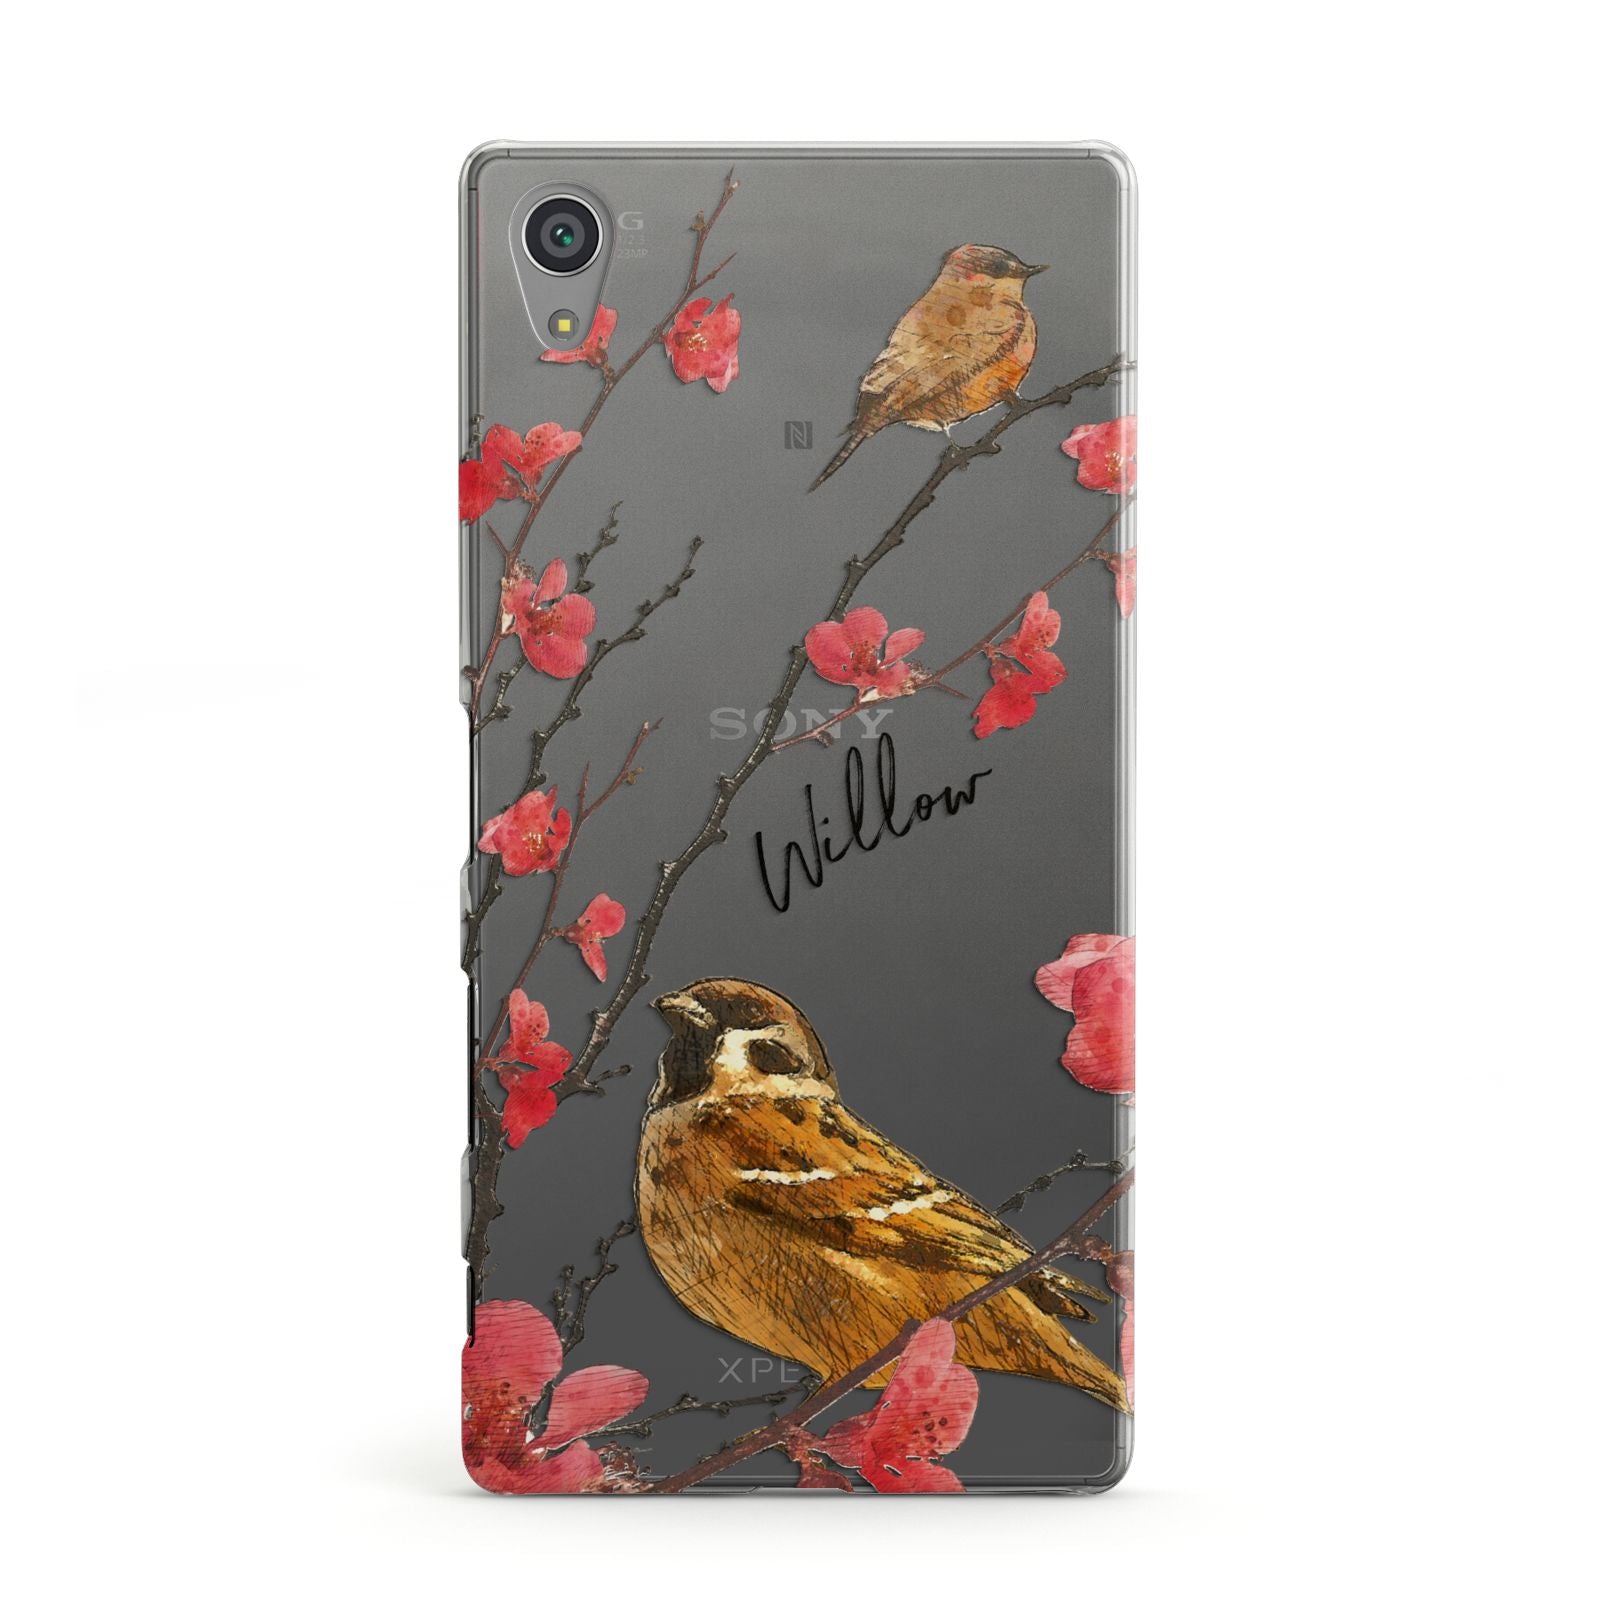 Personalised Birds Sony Xperia Case